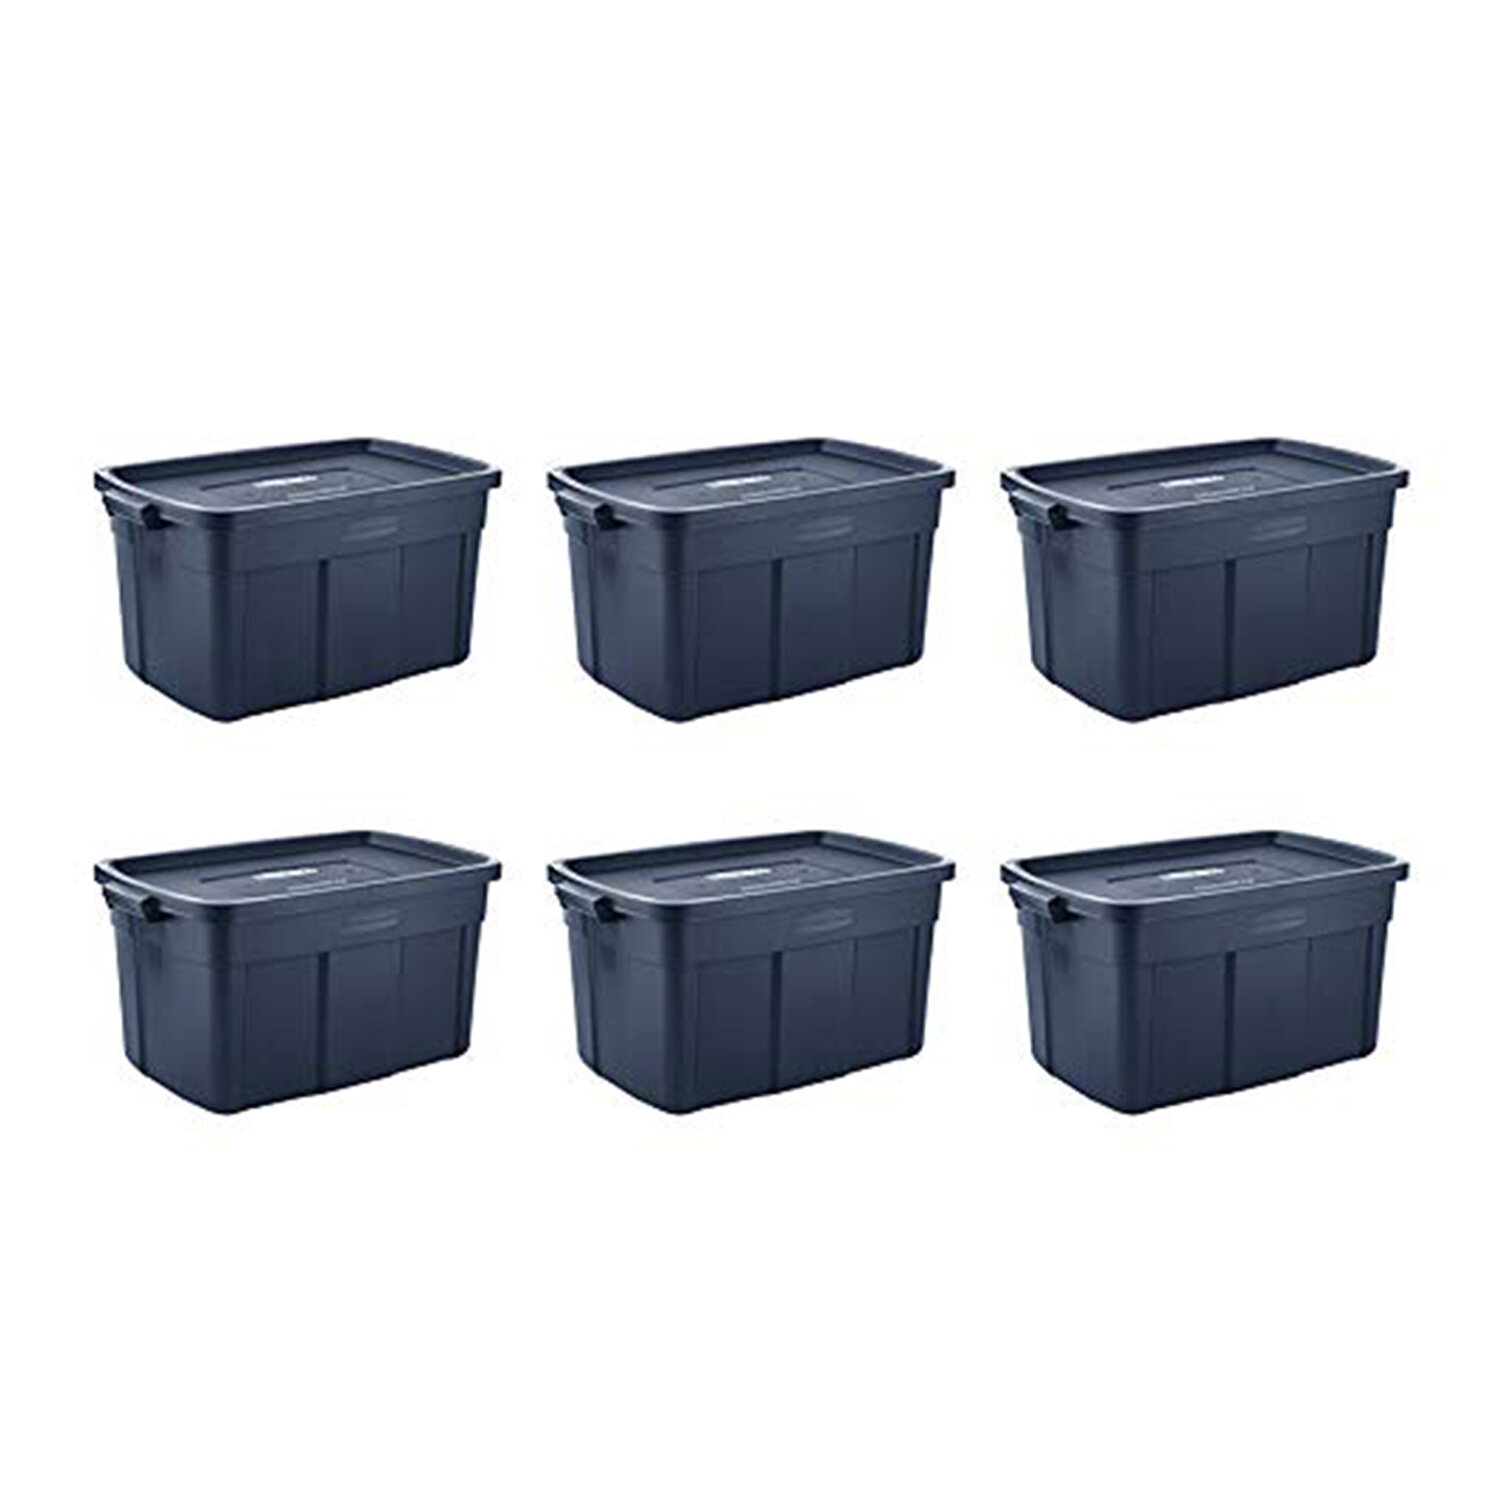 Rubbermaid Roughneck 3 Gal. Rugged Storage Tote Container, Blue (6